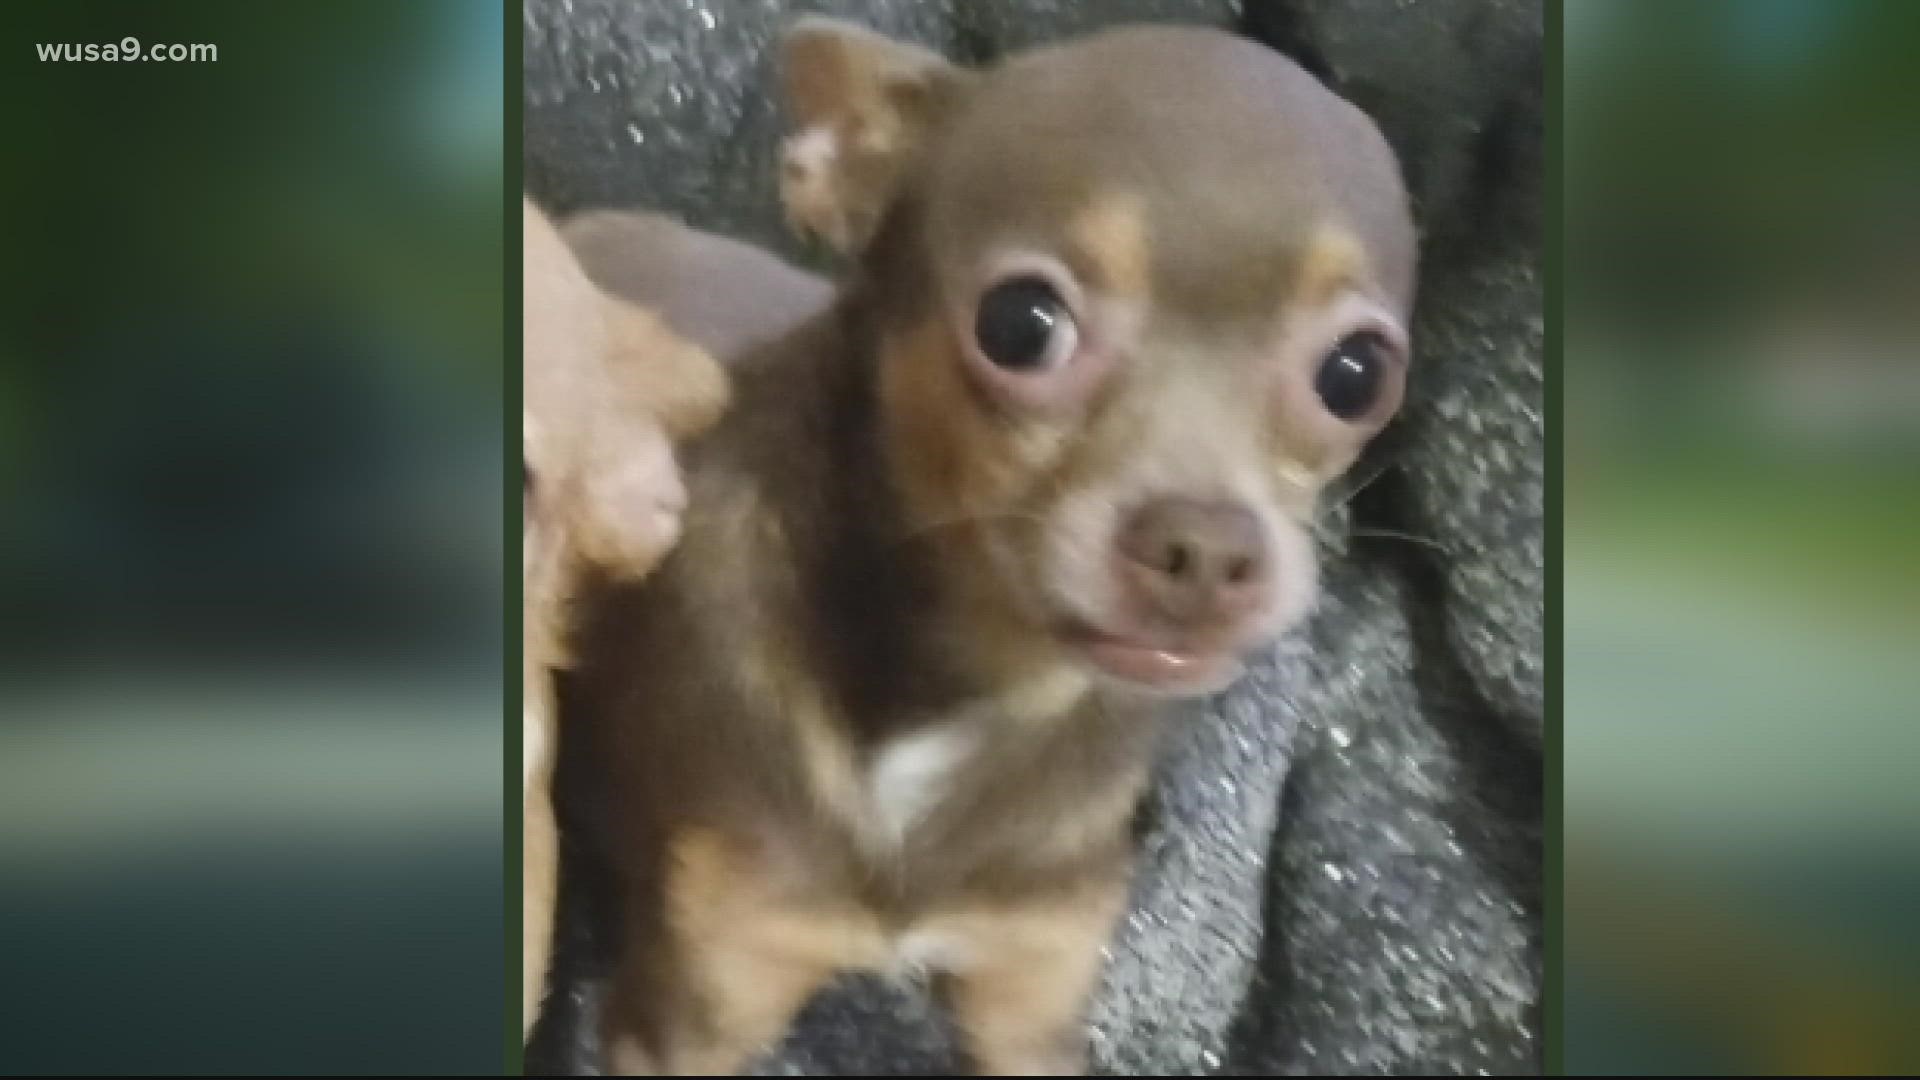 The 7-year-old chihuahua is an emotional support animal for a young boy who lives with Cerebral Palsy.